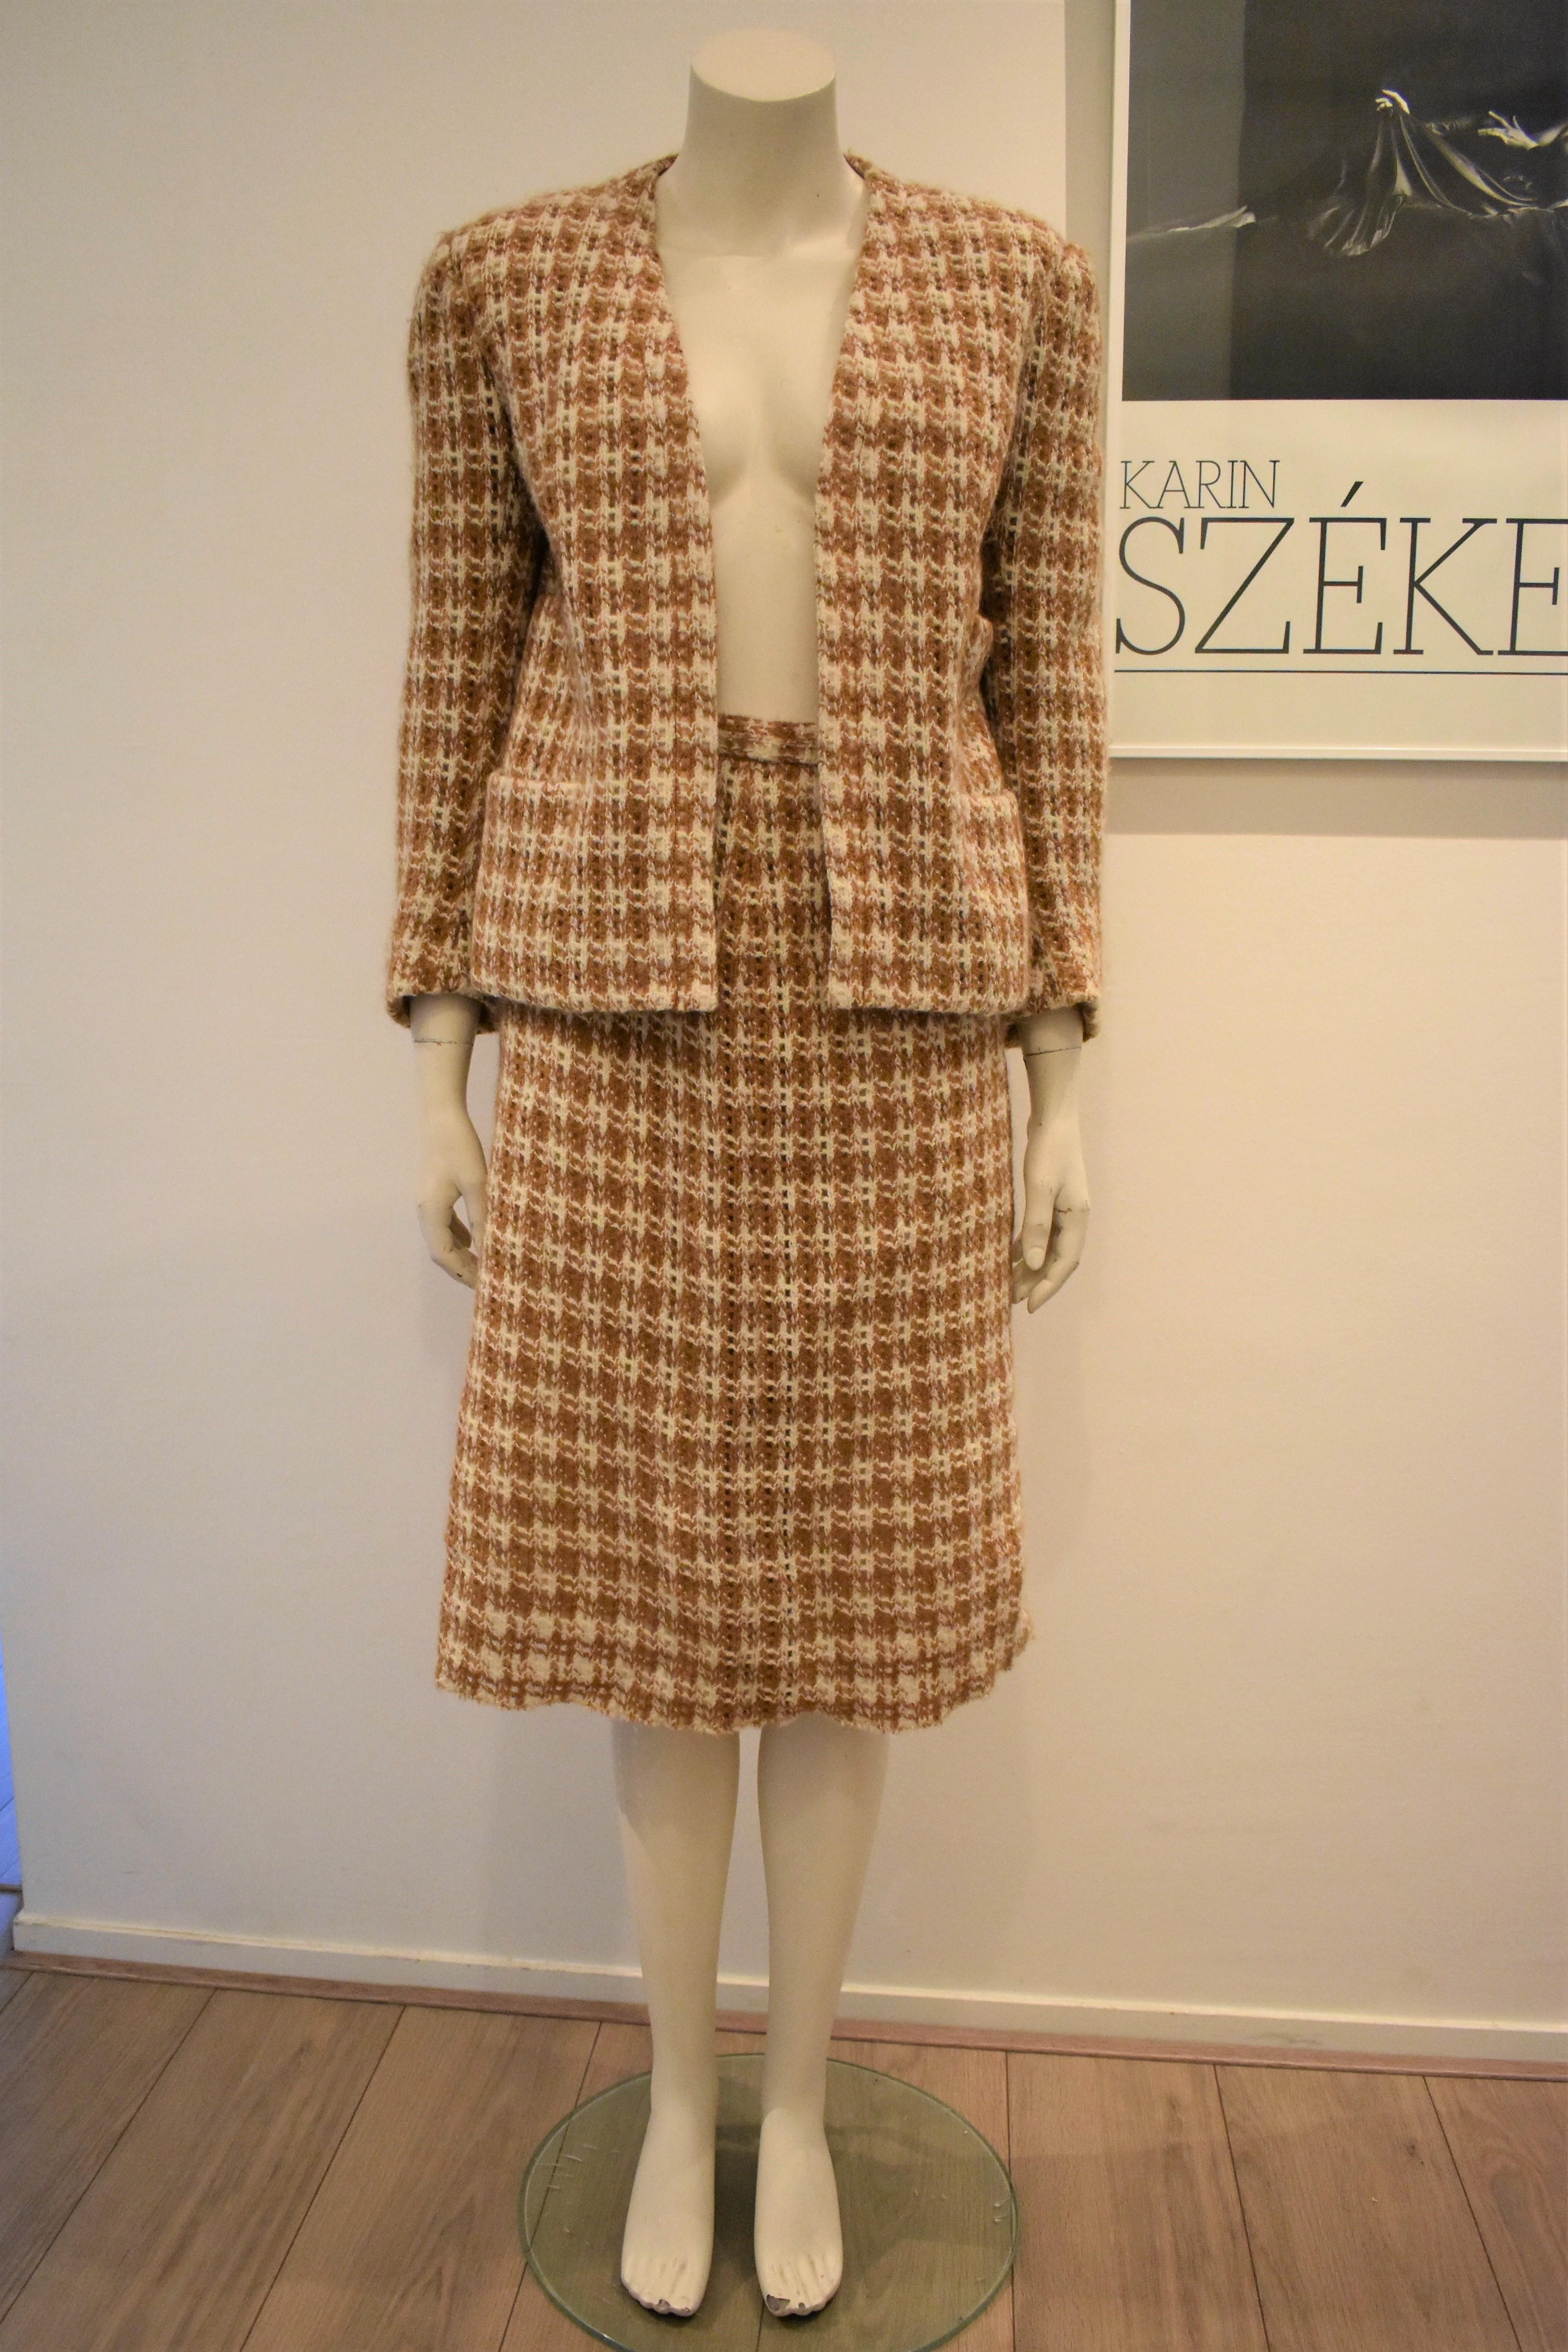 Authentic vintage Rodier Paris knitted skirt suit made from a fluffy soft wool blend.
Before shipping, this ensemble will be send to a specialist for a complementary dry cleaning, so it will be perfect and ready to wear upon arrival.

'Rodier made